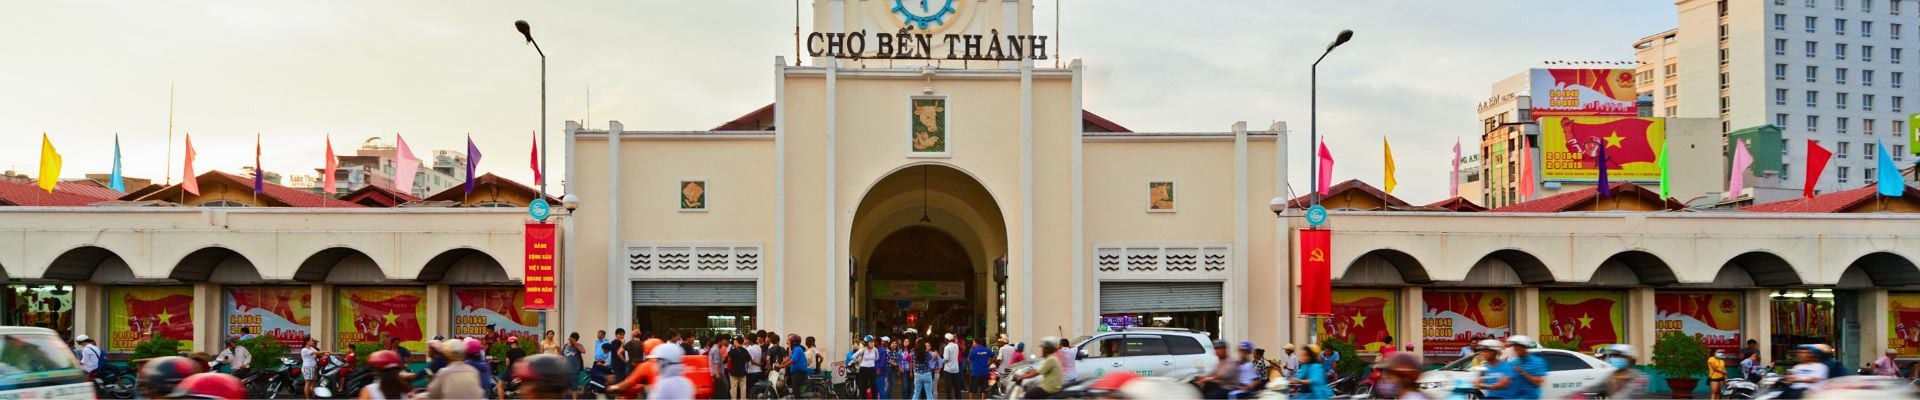 Image of Ben Thanh Market Discovery Challenge Tour